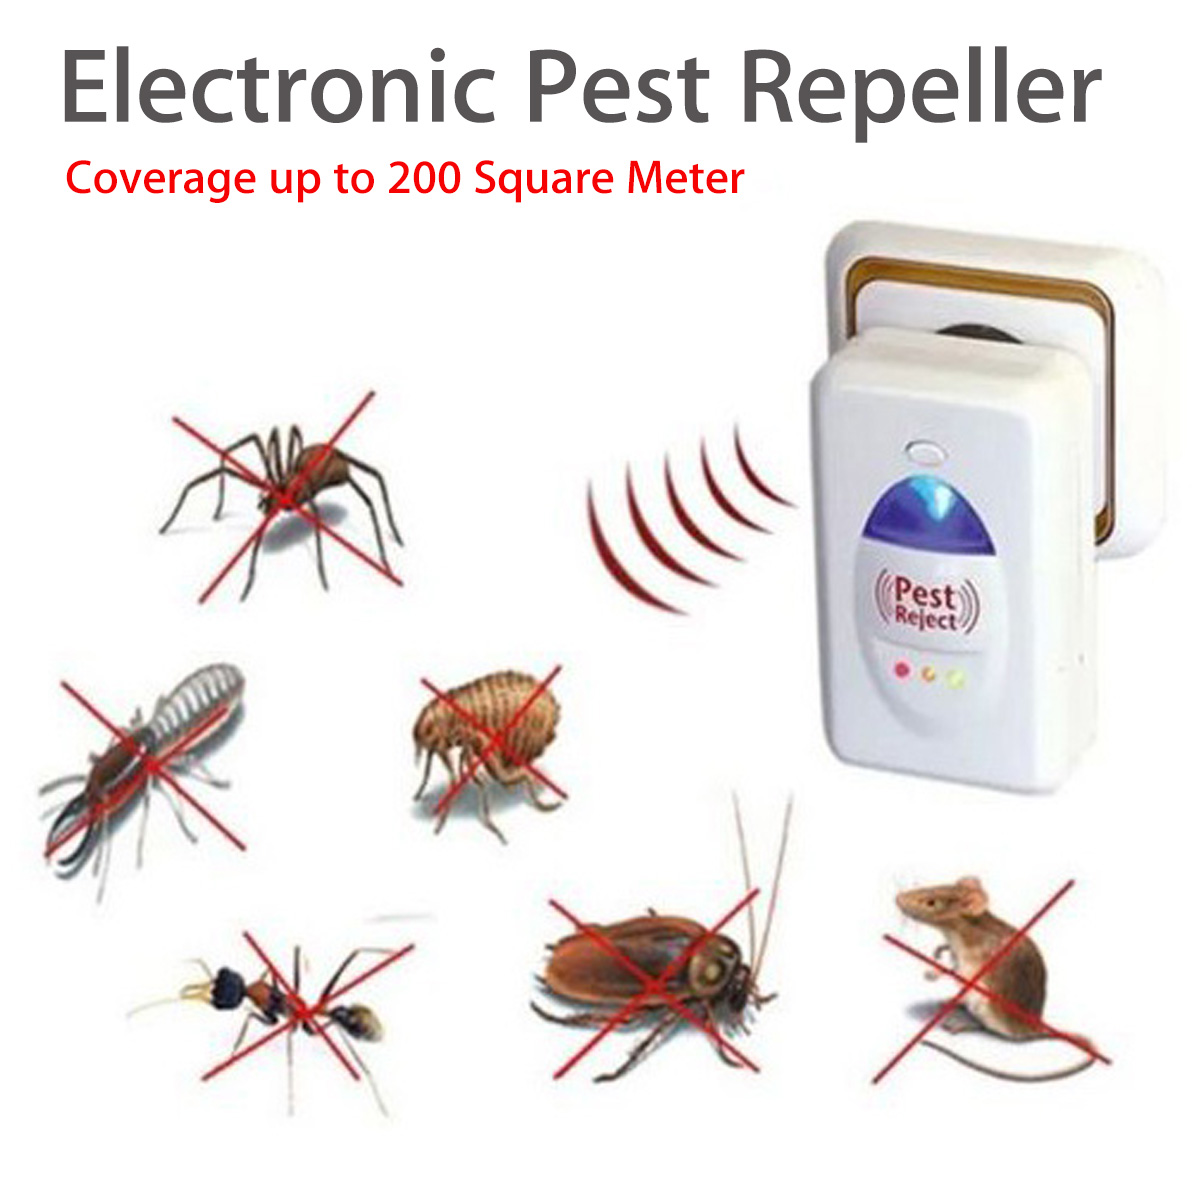 110V-Ultrasonic-Electronic-Pest-Dispeller-Reject-Anti-Mosquito-Bug-Insect-Enhanced-PVC-1612001-4